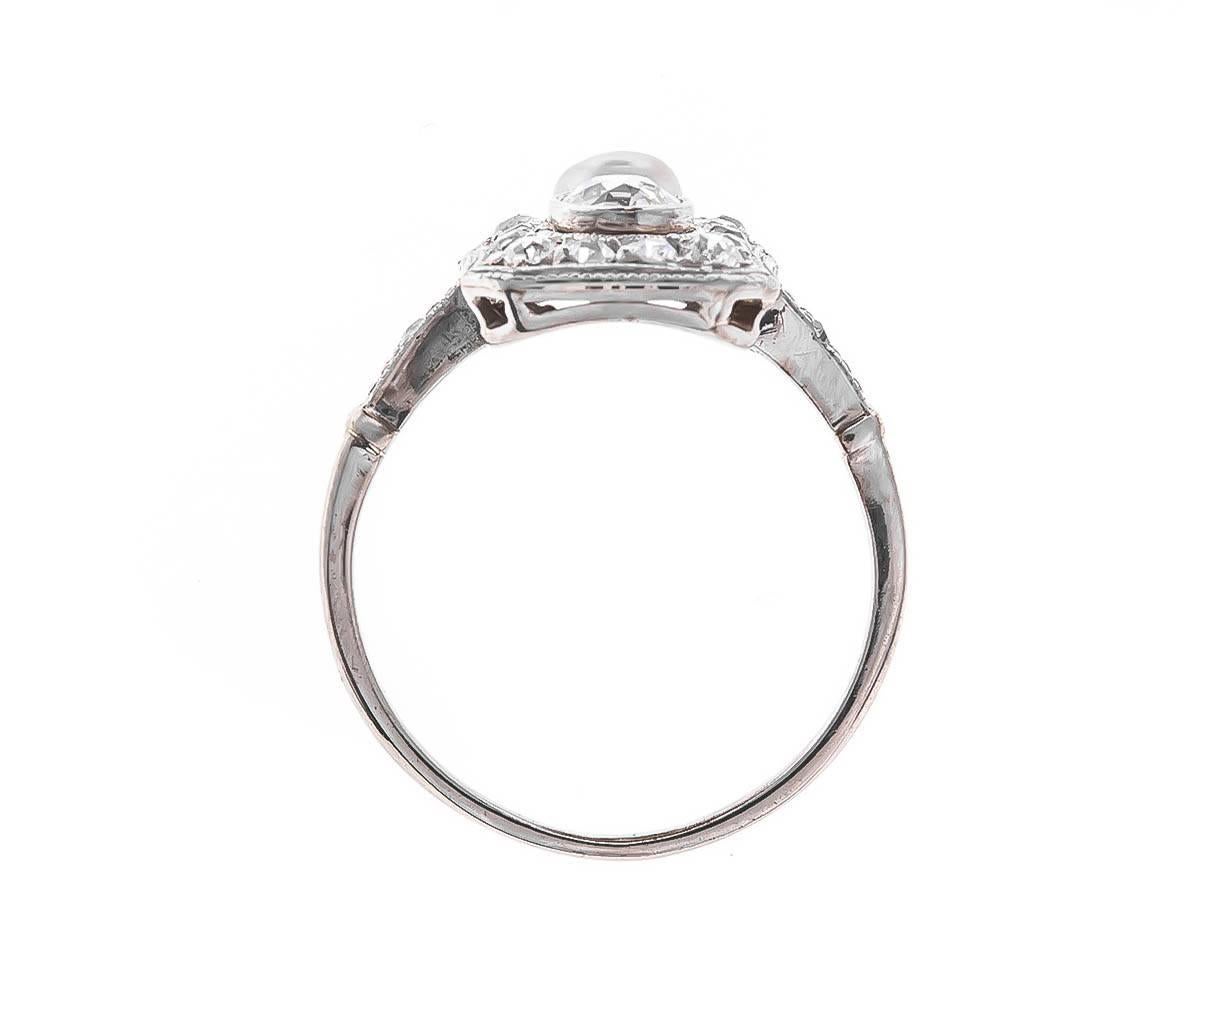 An Art Deco 14ct white gold ring encrusted with shimmering old cut diamonds around a 0.32ct old English brilliant cut diamond and gleaming white seed pearl. A plaque design measuring 15.94mm x 10.60mm, with a beautiful, finely worked gallery and